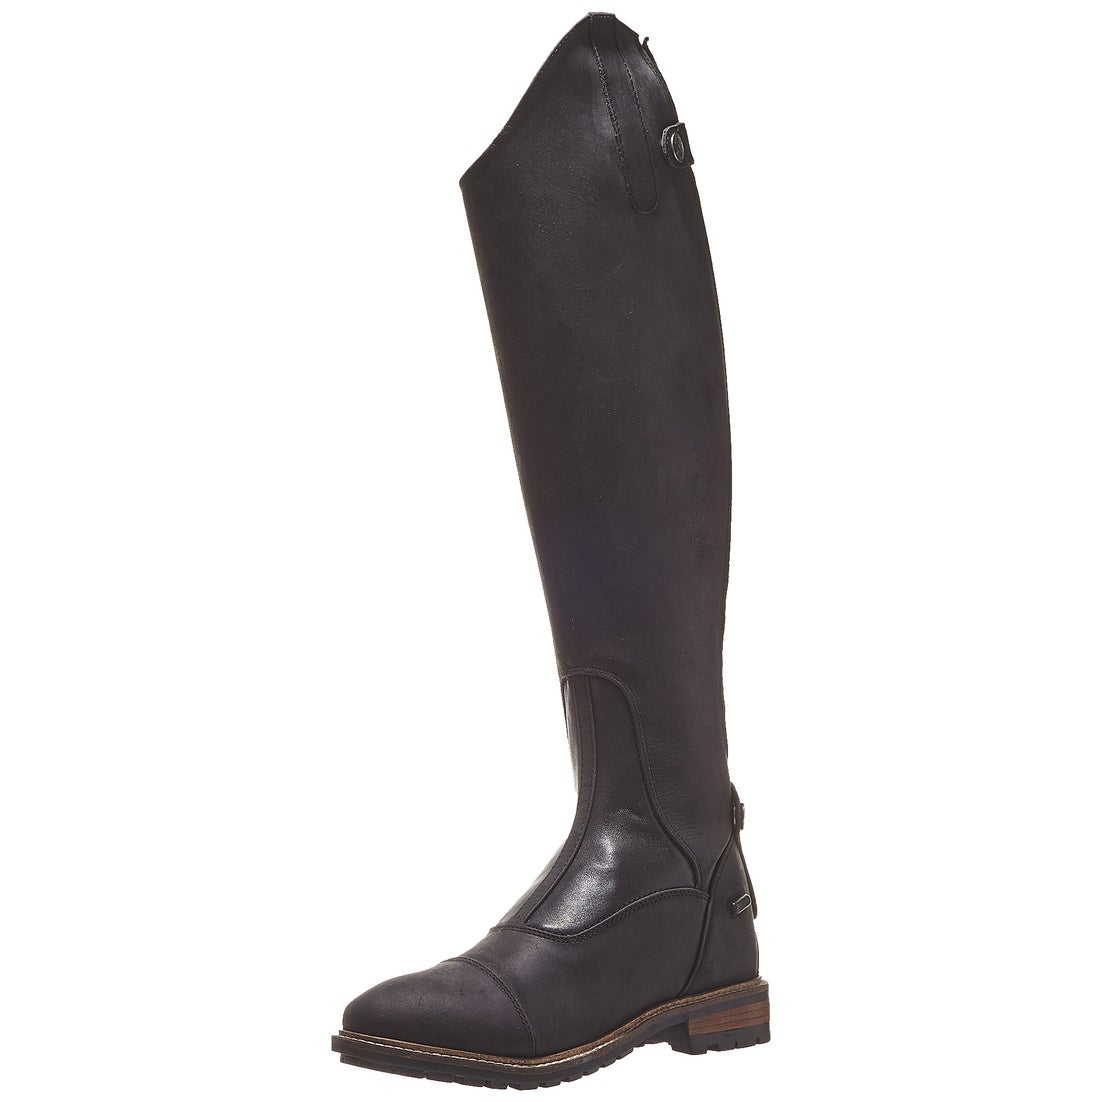 Ovation Coventry Tall Rider Boots - Black | Riding Warehouse